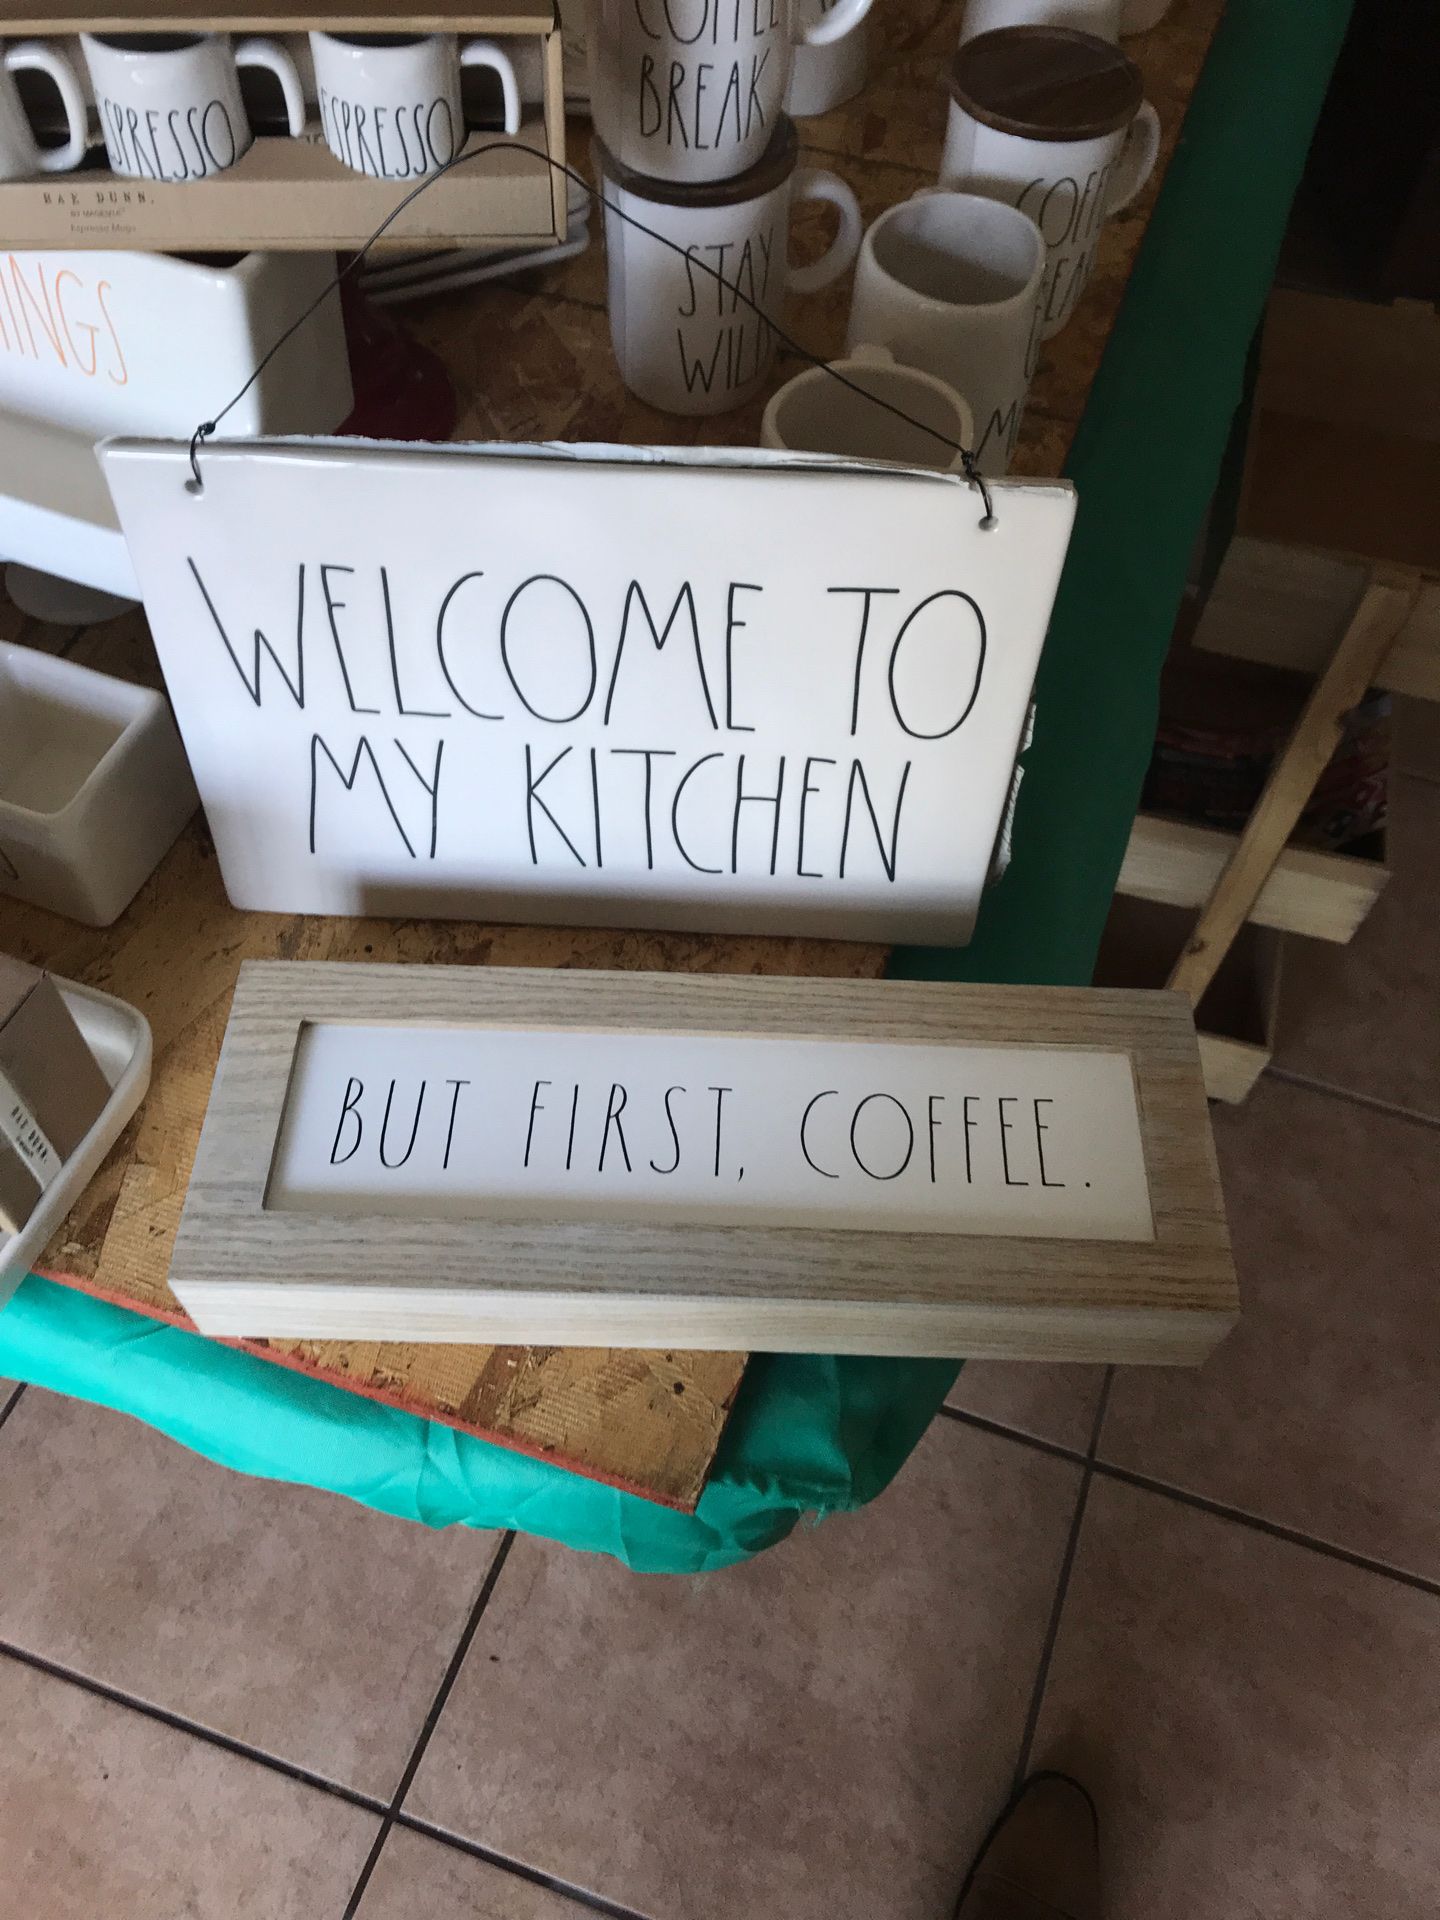 Rae Dunn WELCOME TO MY KITCHEN 12 x 8.5 large ceramic sign. - Bur First, Coffee sign 🤠Love it ..